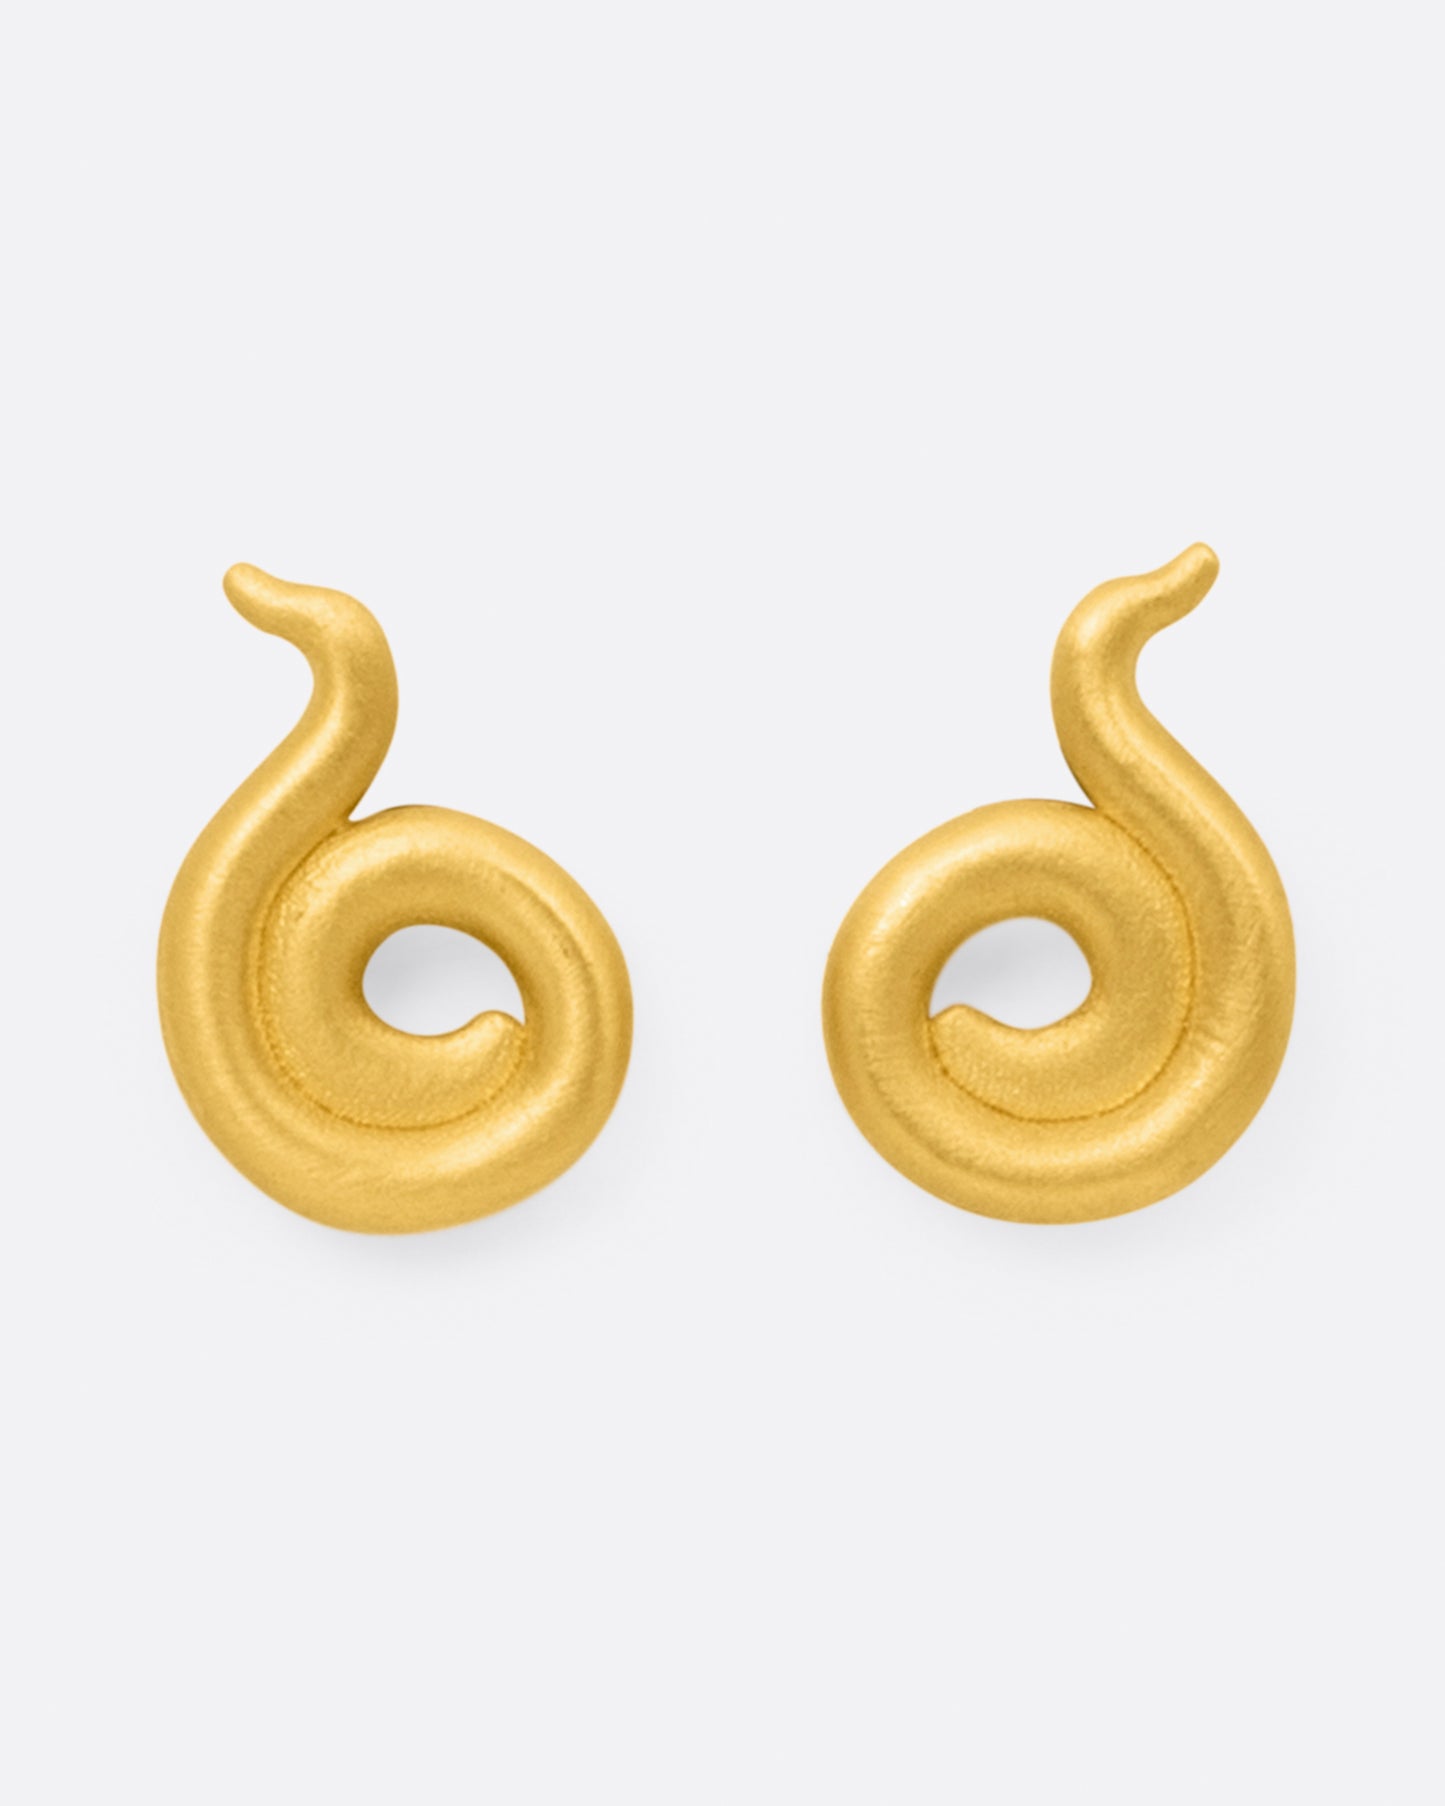 A pair of coiled 22k yellow gold stud earrings, shown from the front.